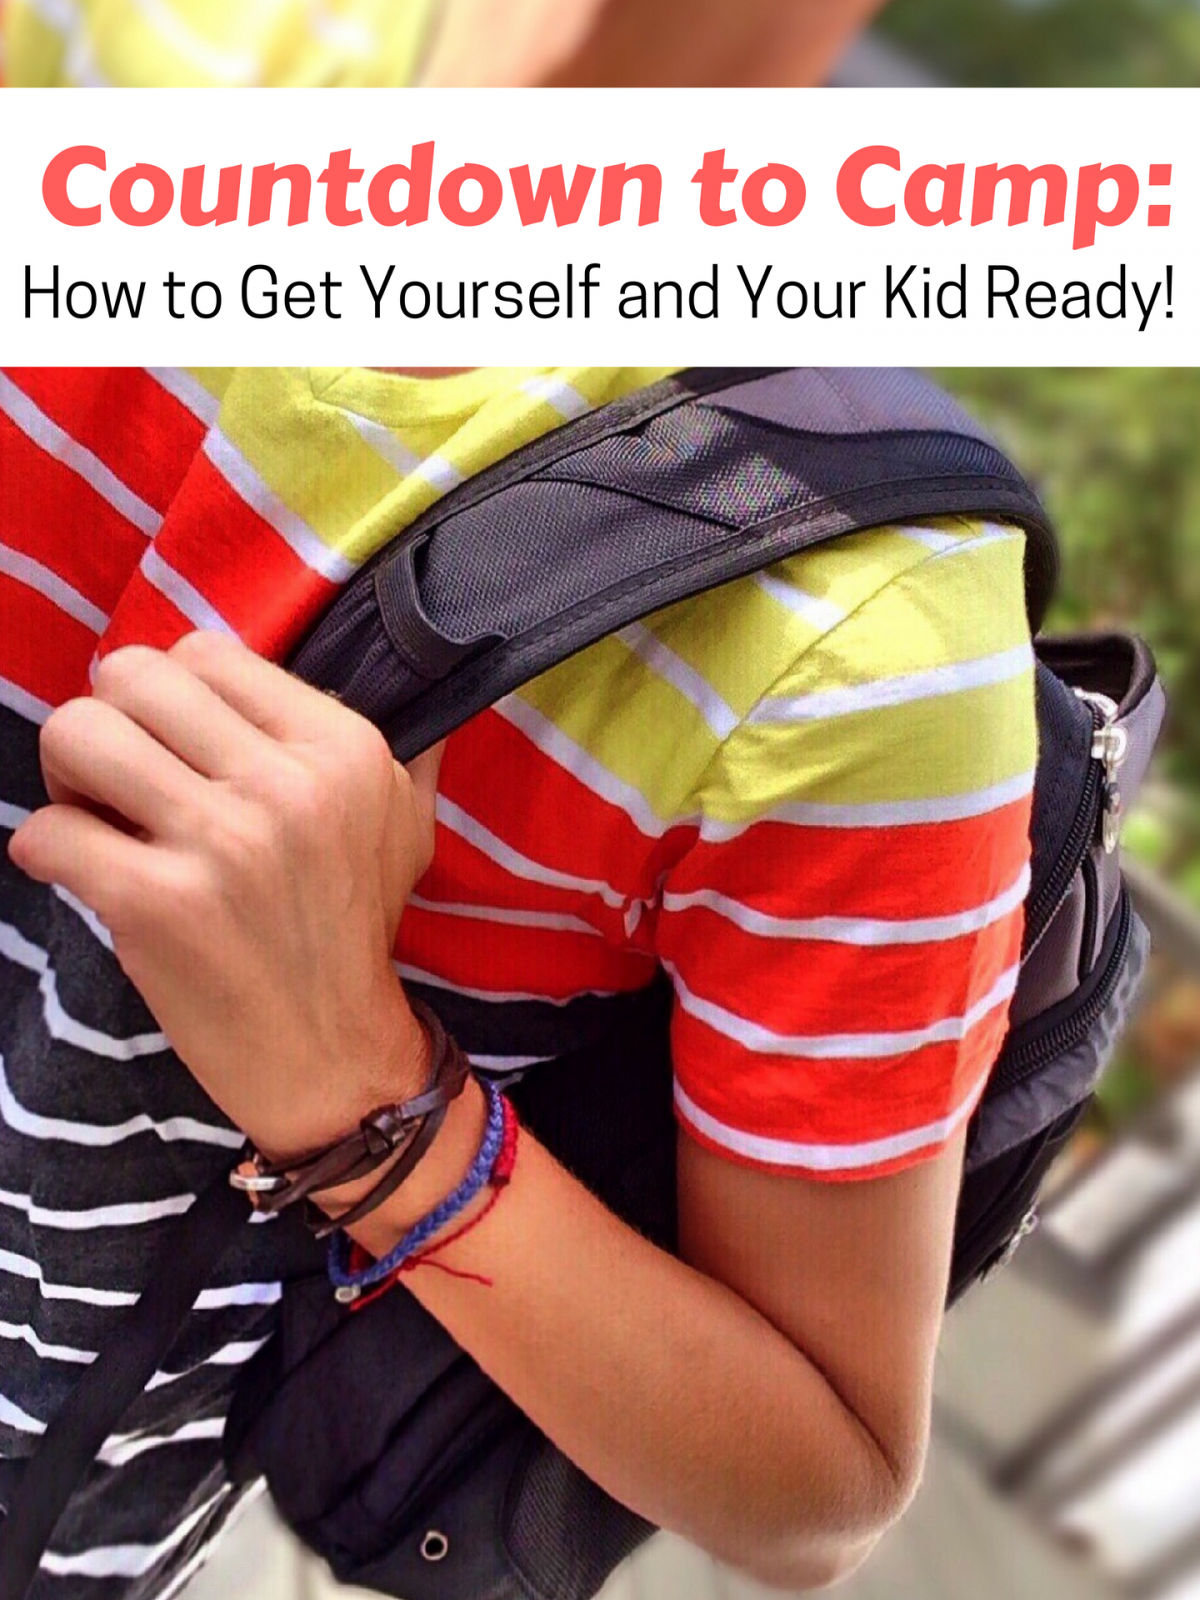 Countdown to Camp: How to Get Yourself and Your Kid Ready!